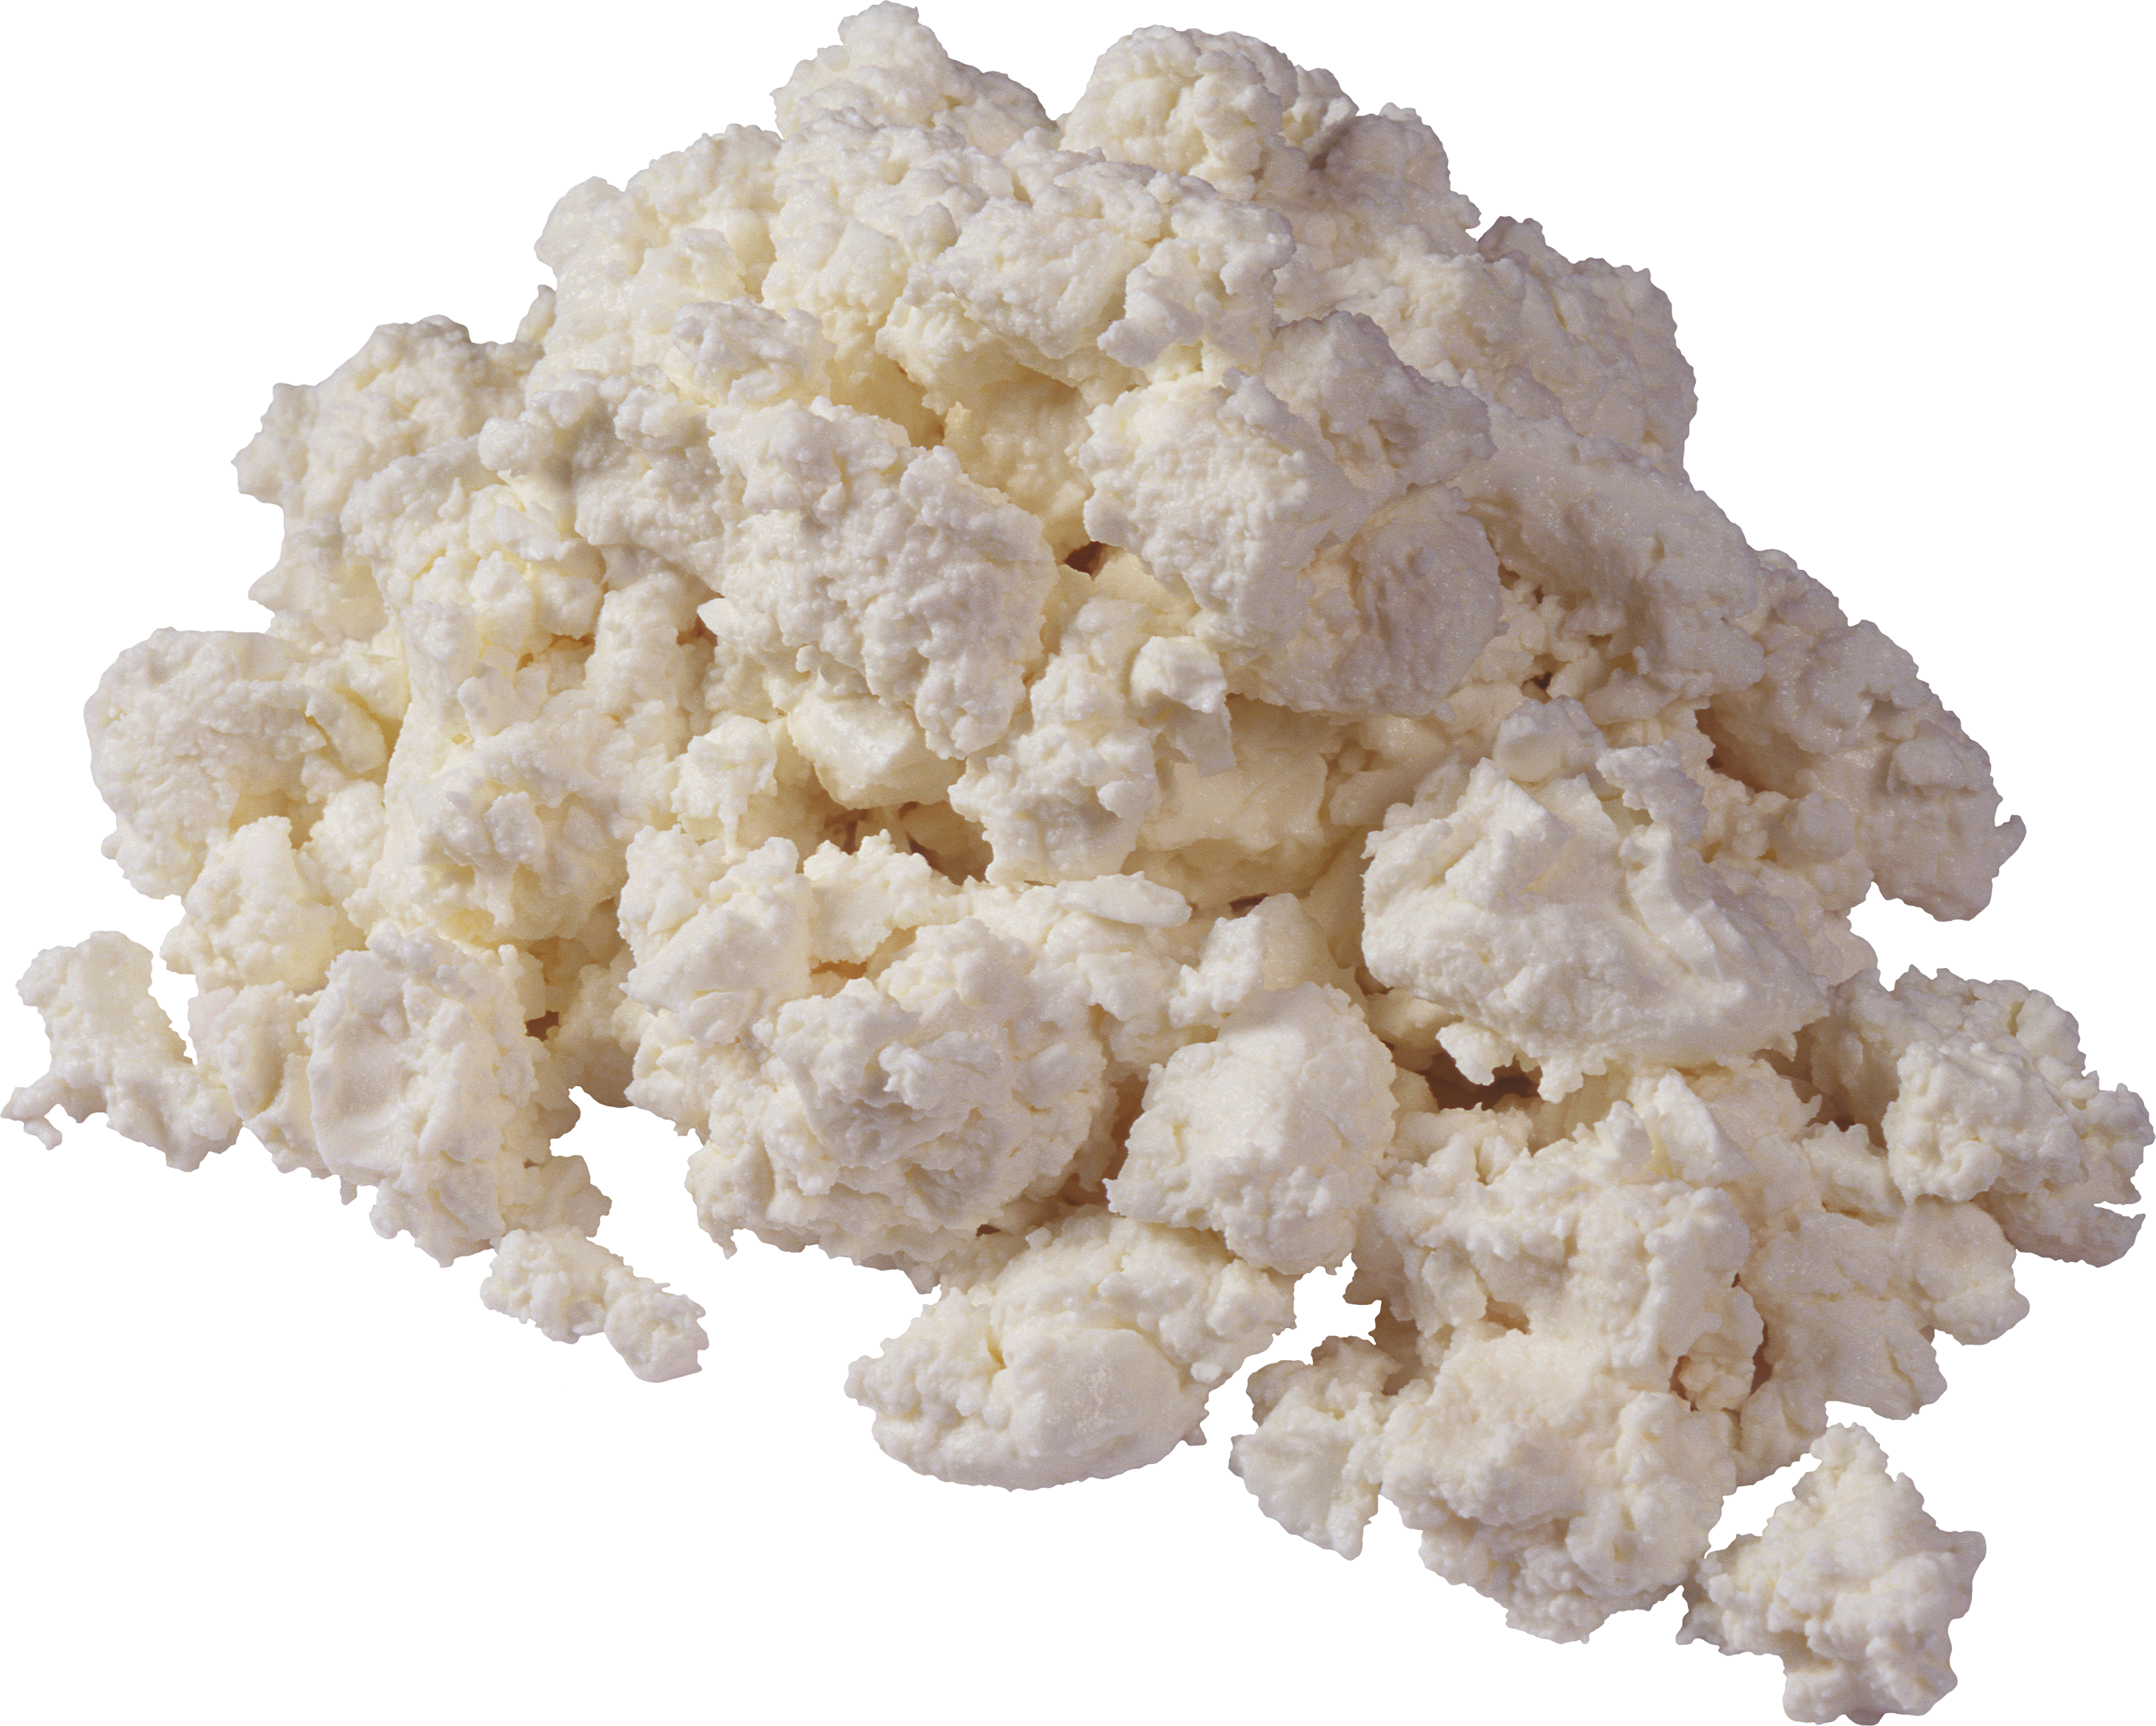 Cottage cheese PNG